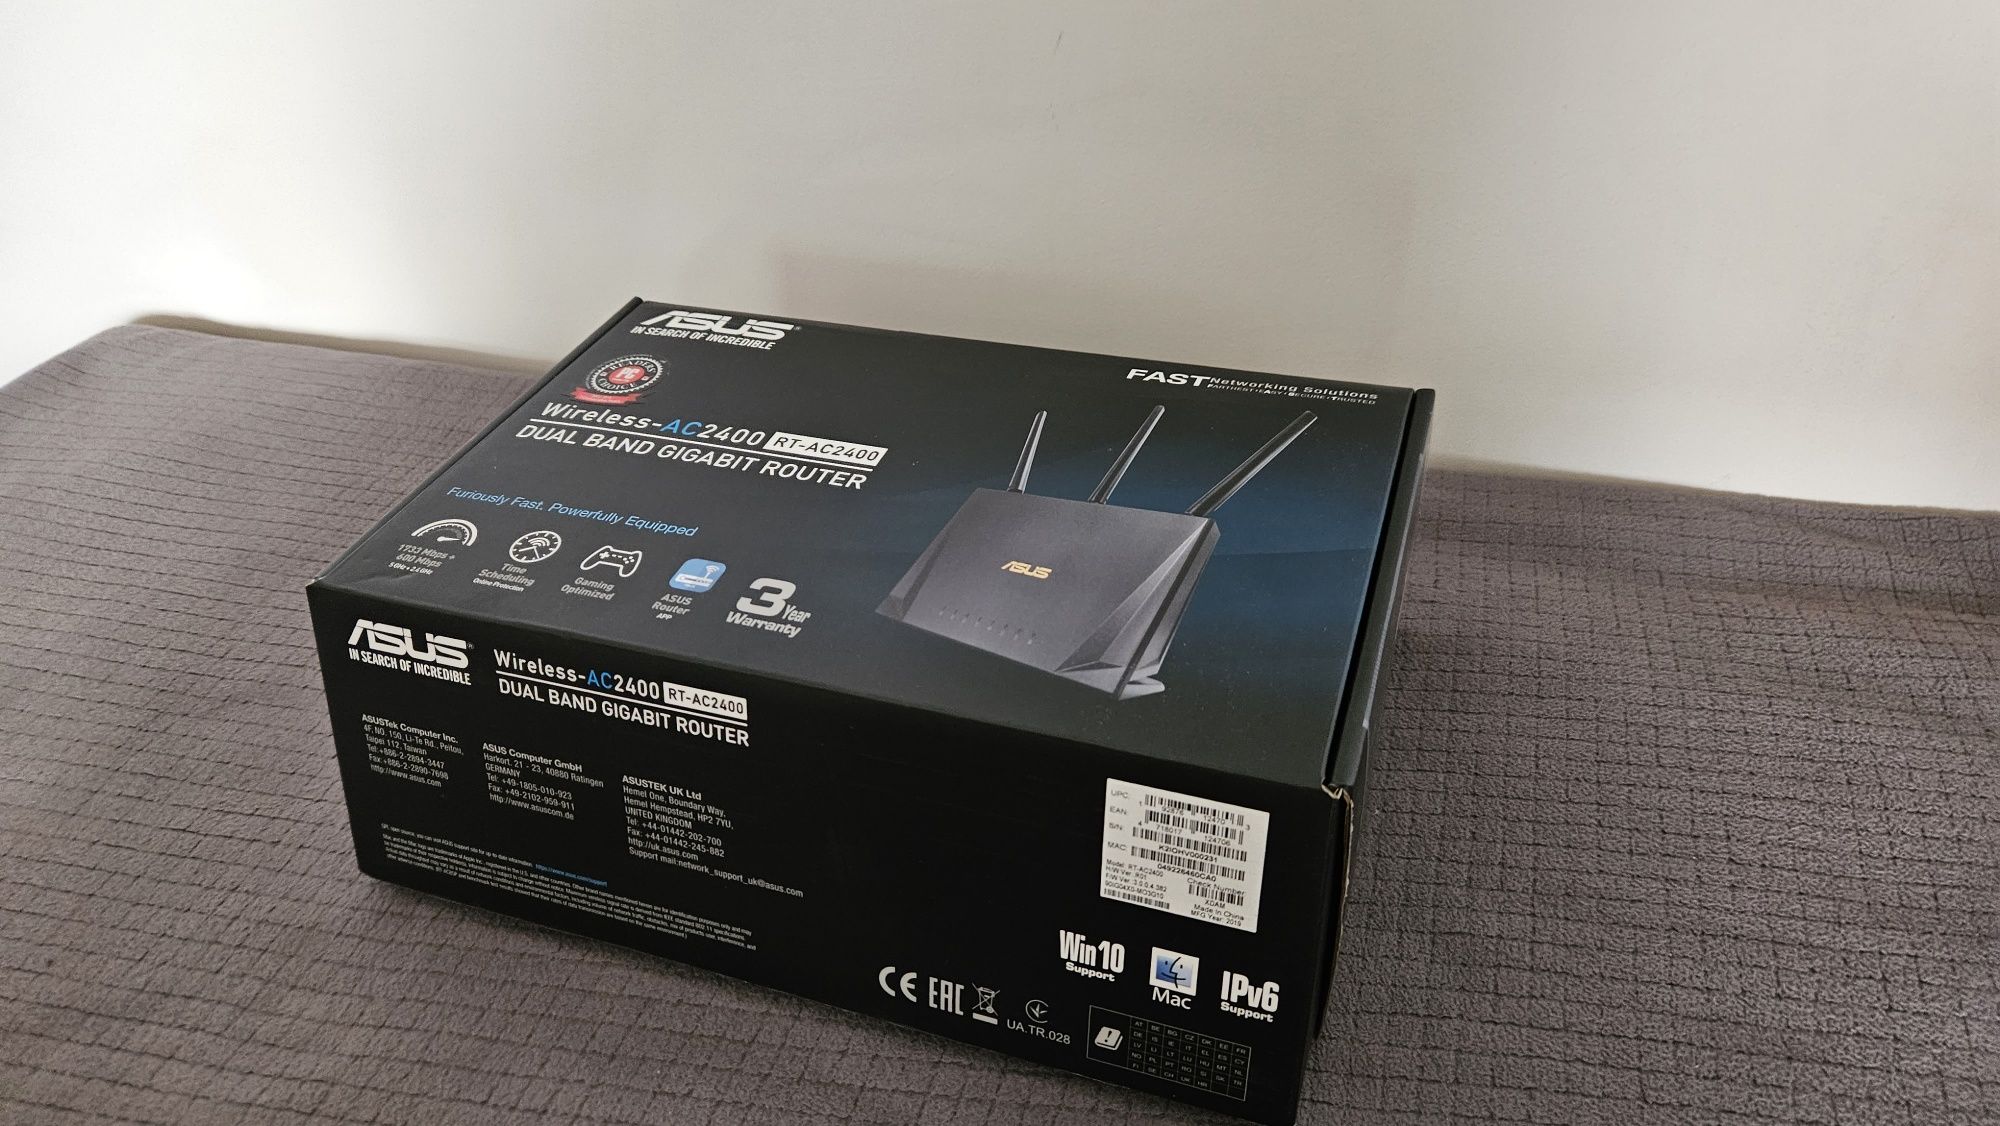 Router Wireless ASUS RT-AC2400 Dual-Band 600 + 1733 Mbps, USB 3.0